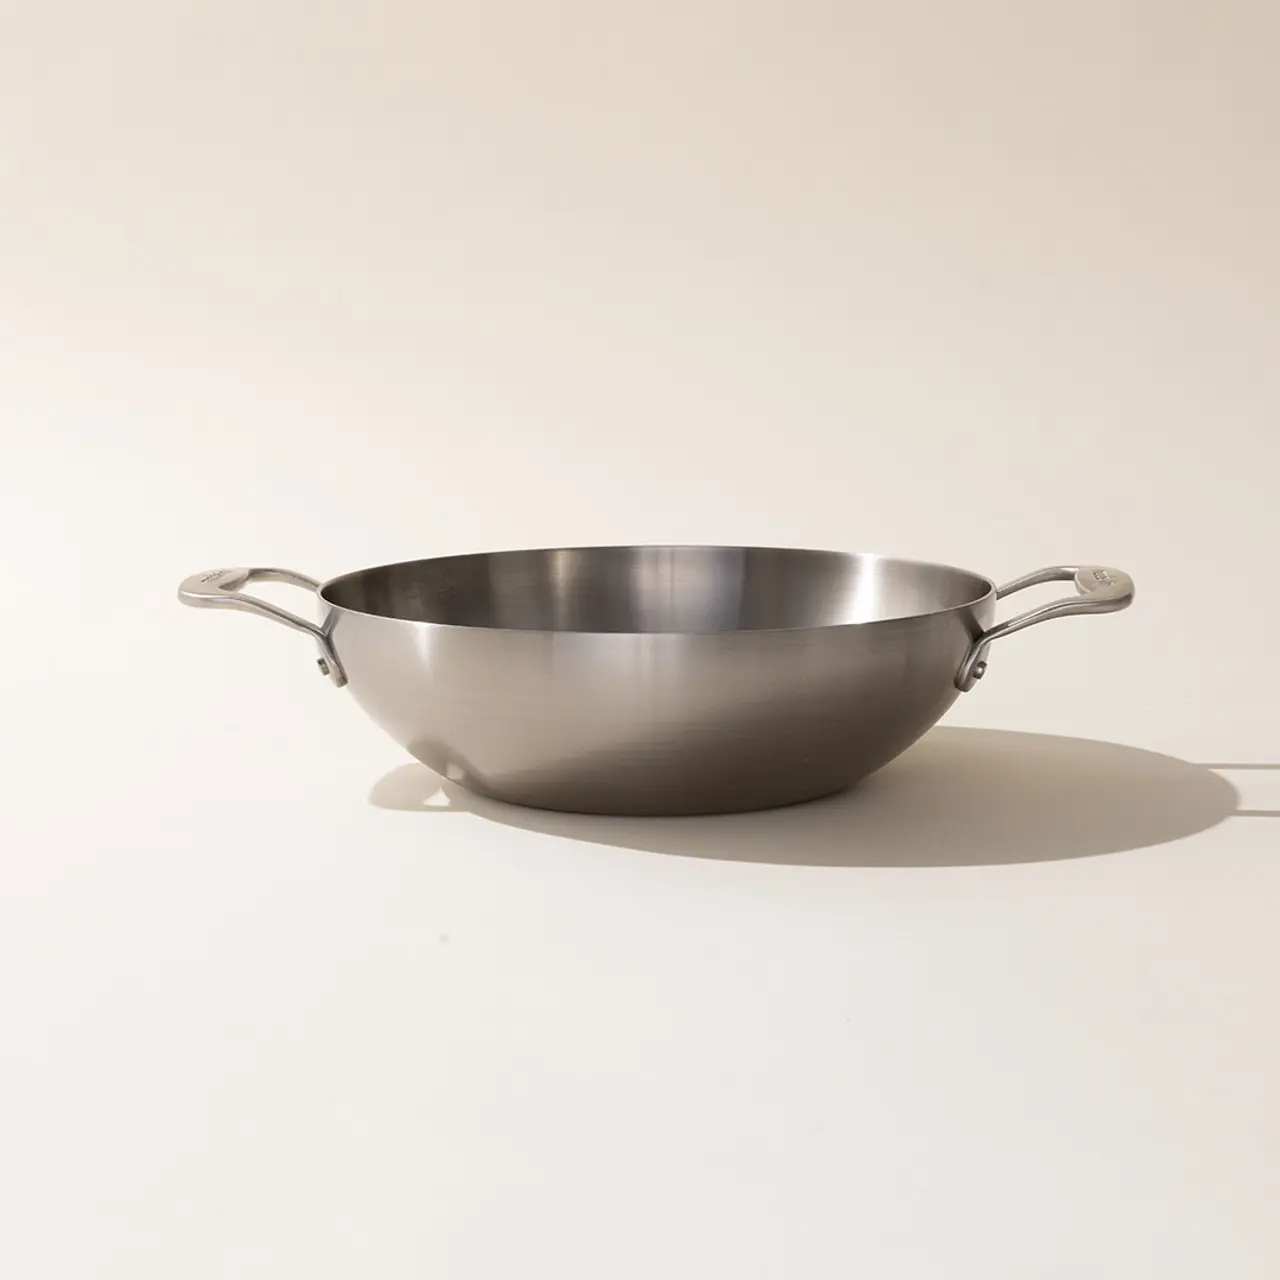 A stainless steel wok with two handles against a neutral background.